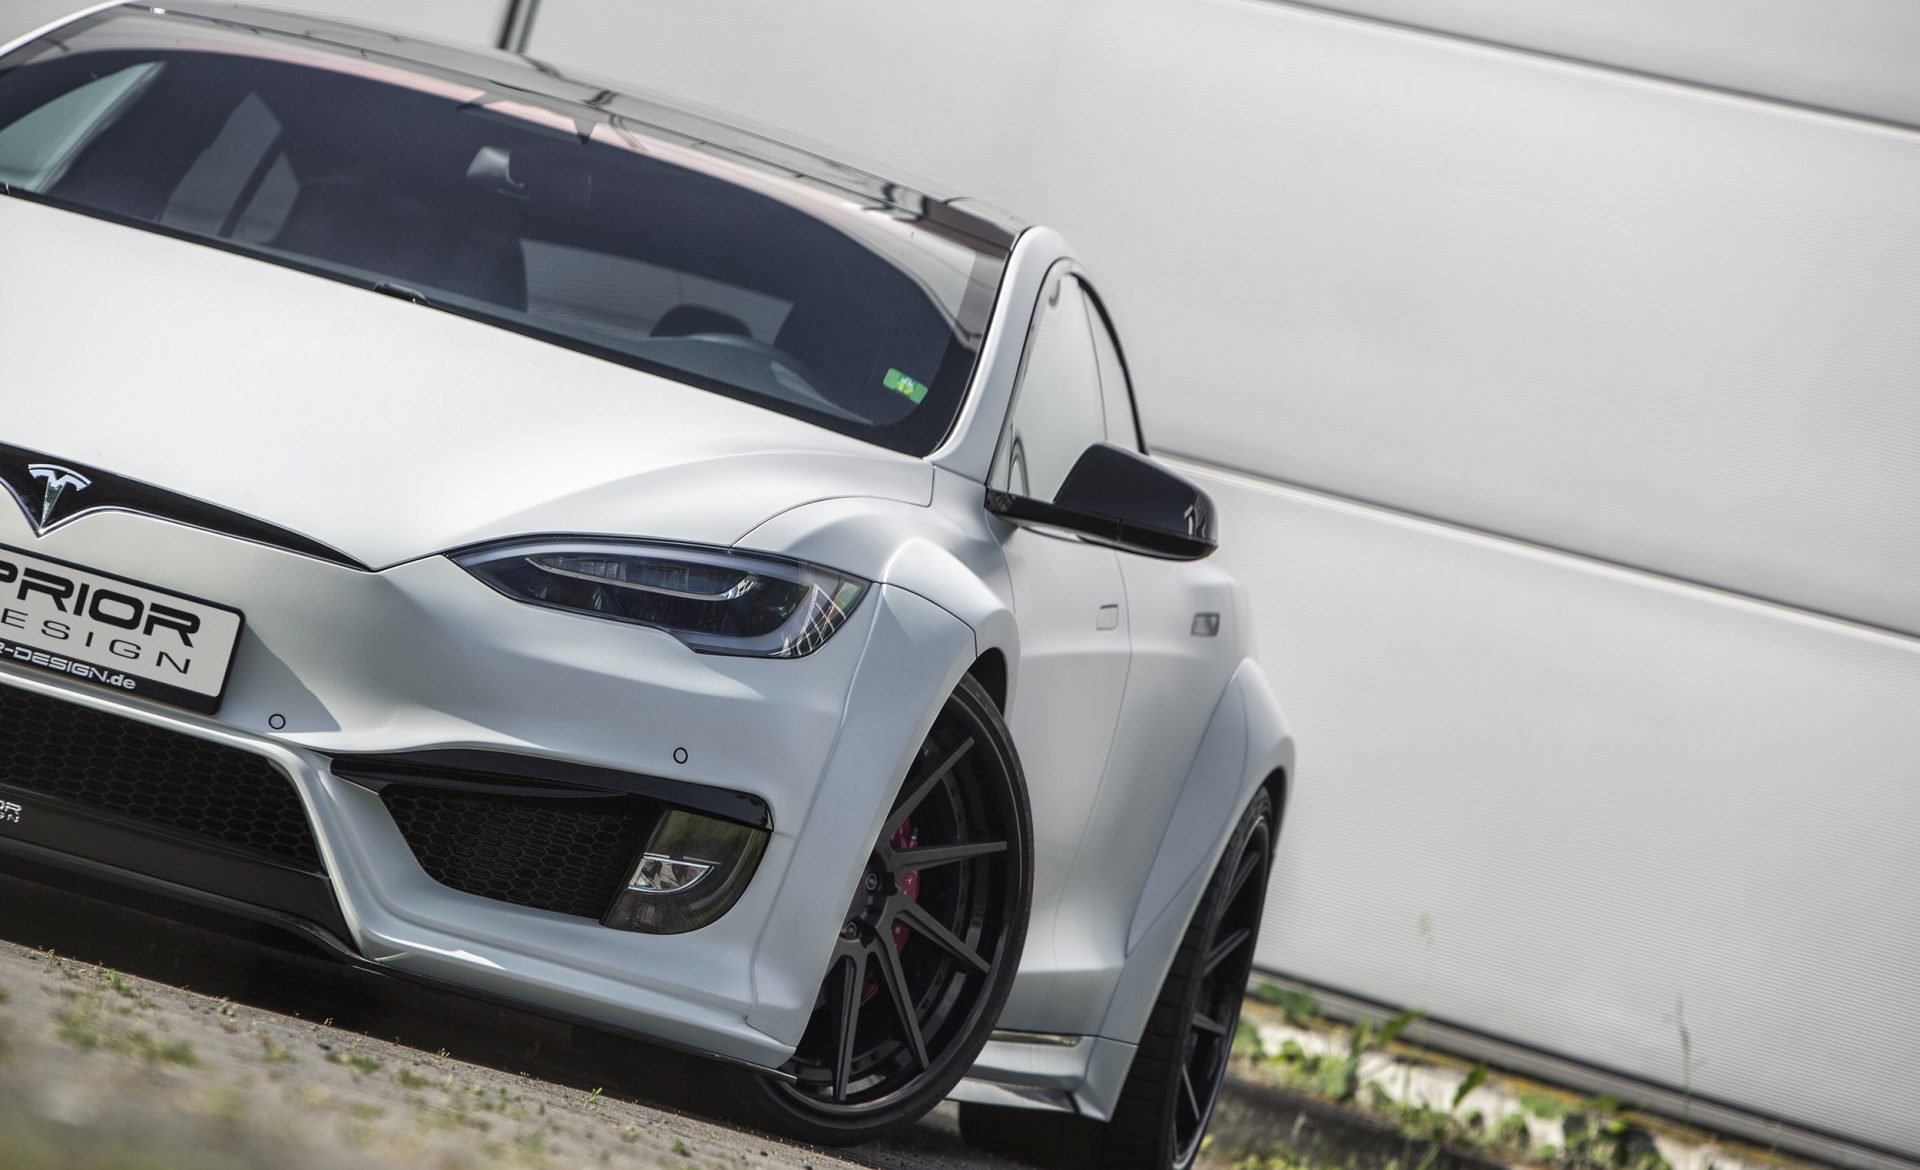 PD-S1000 Widebody Front Widenings for Tesla Model S [2016+]